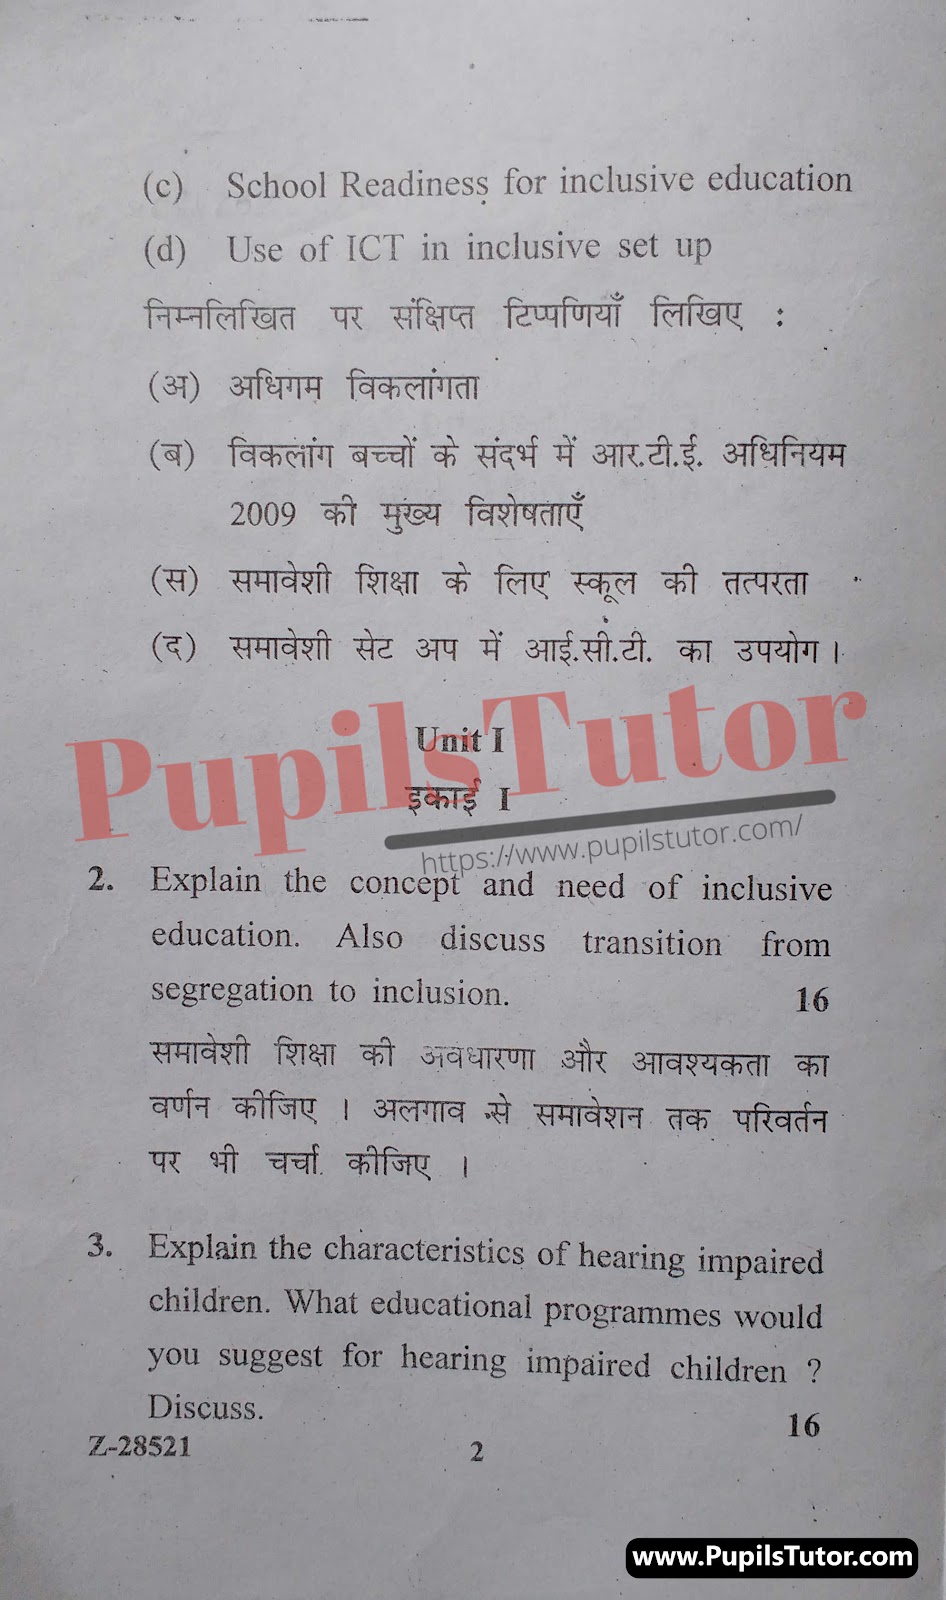 Chaudhary Ranbir Singh University (CRSU), Jind, Haryana B.Ed Creating An Inclusive School Second Year Important Question Answer And Solution - www.pupilstutor.com (Paper Page Number 2)